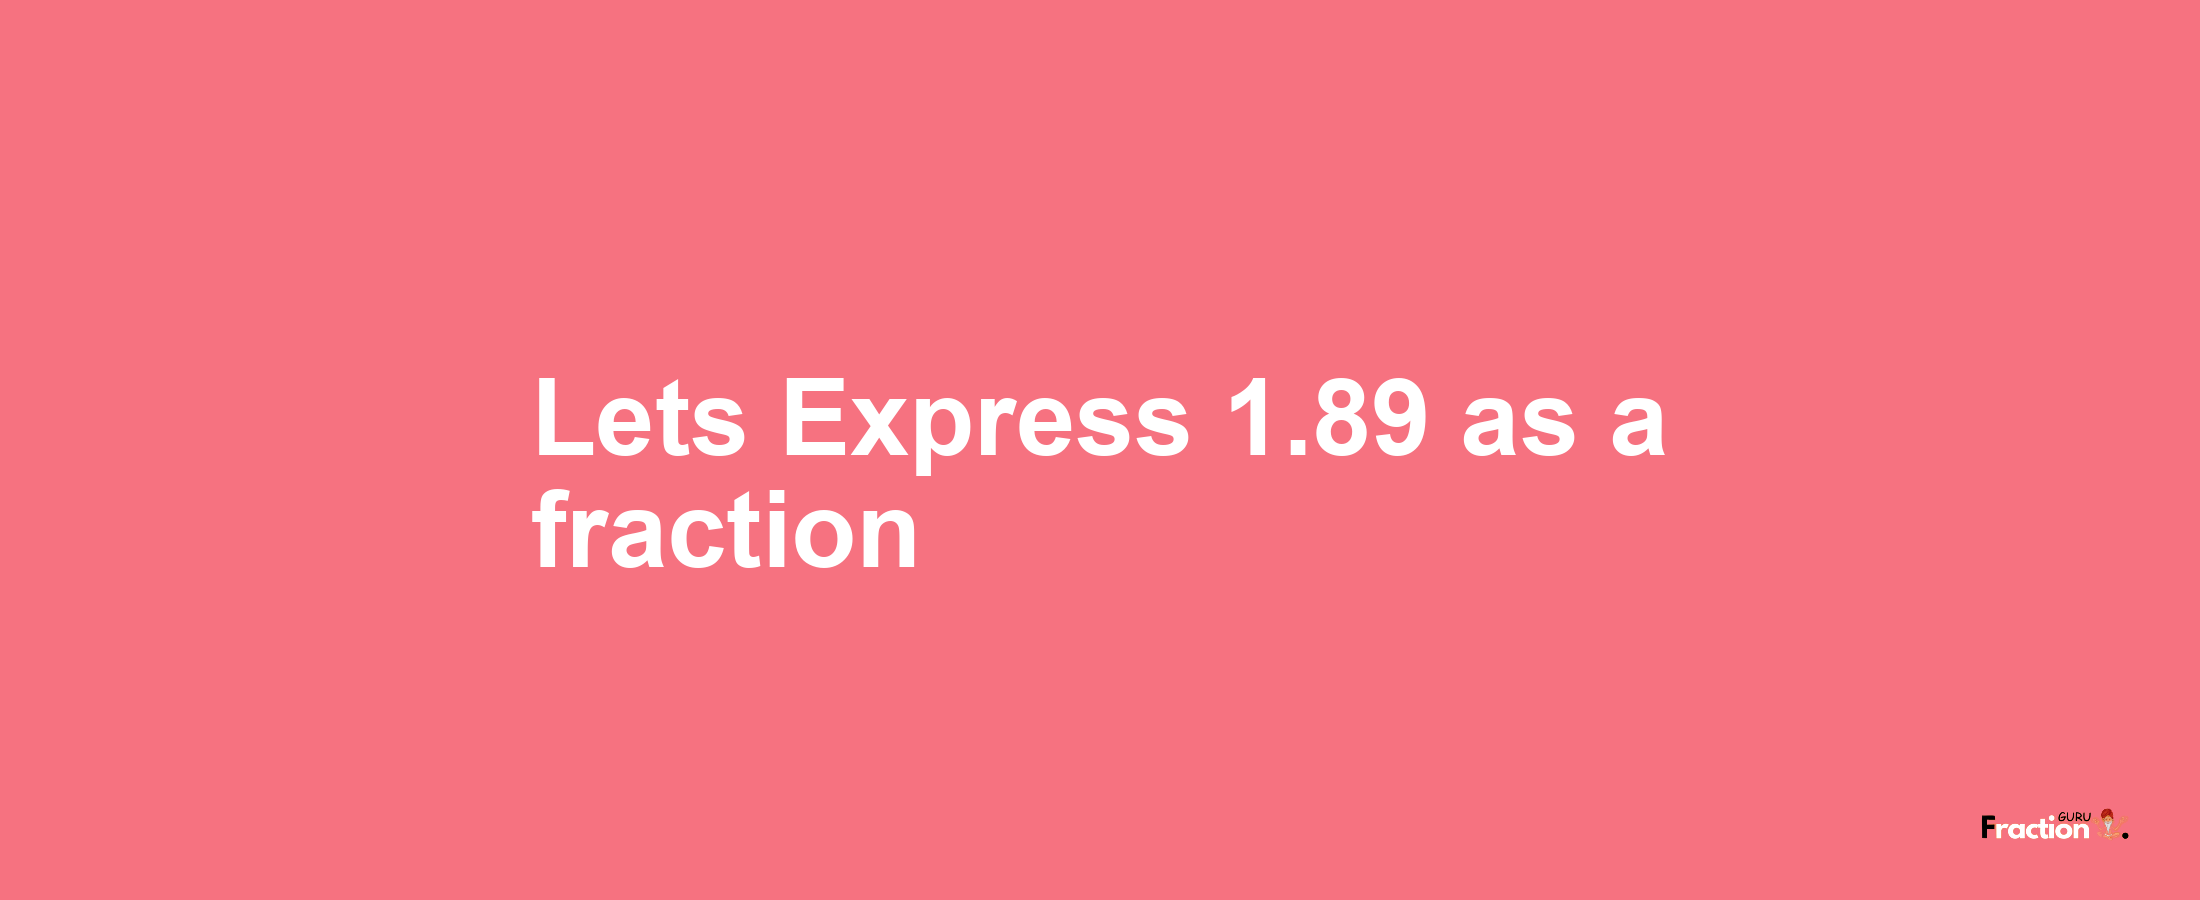 Lets Express 1.89 as afraction